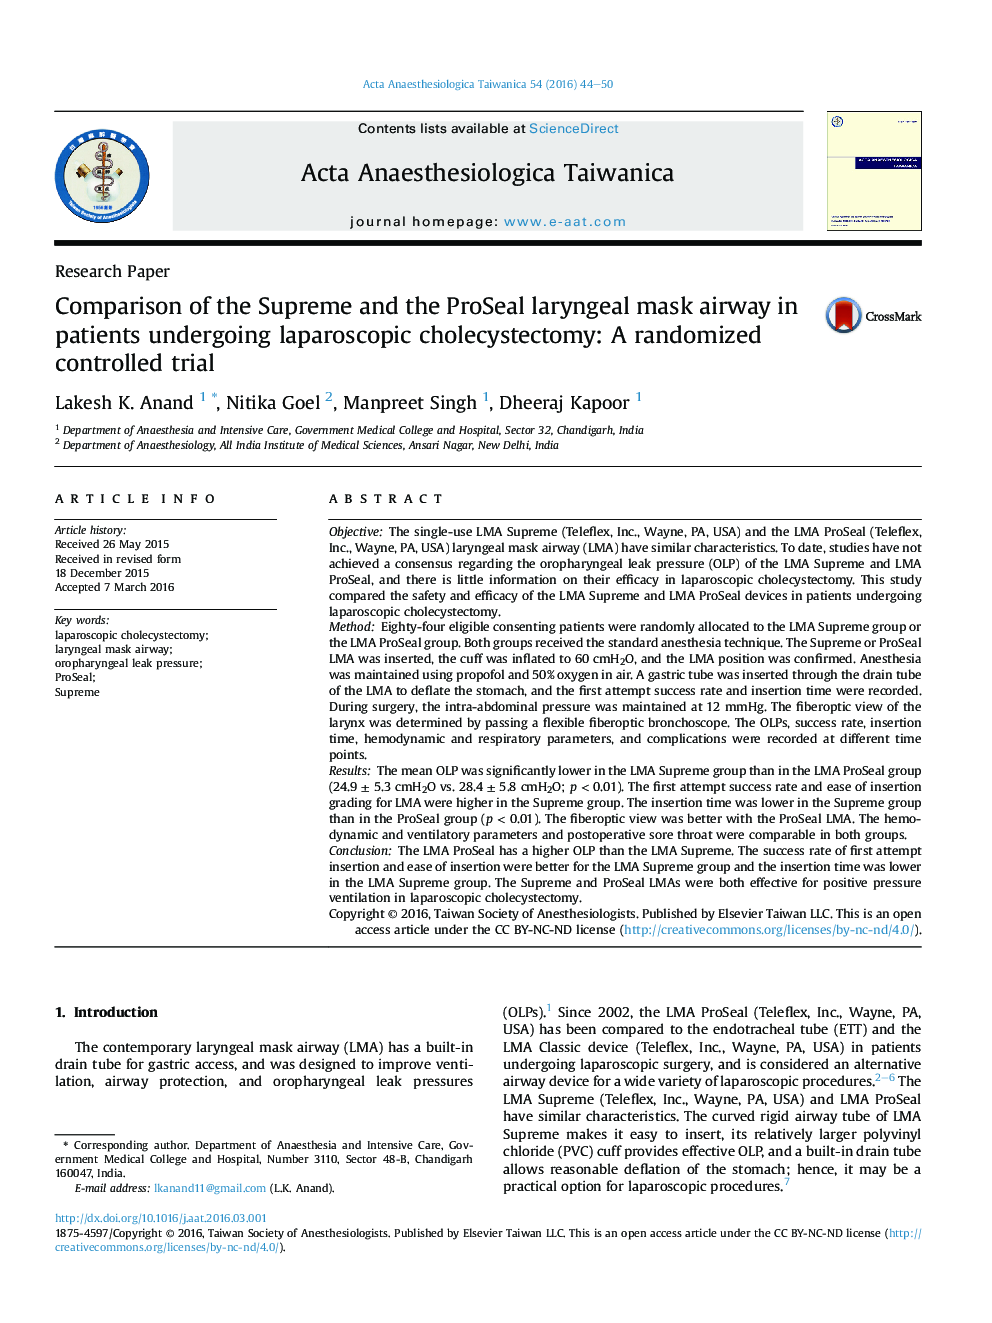 Comparison of the Supreme and the ProSeal laryngeal mask airway in patients undergoing laparoscopic cholecystectomy: A randomized controlled trial